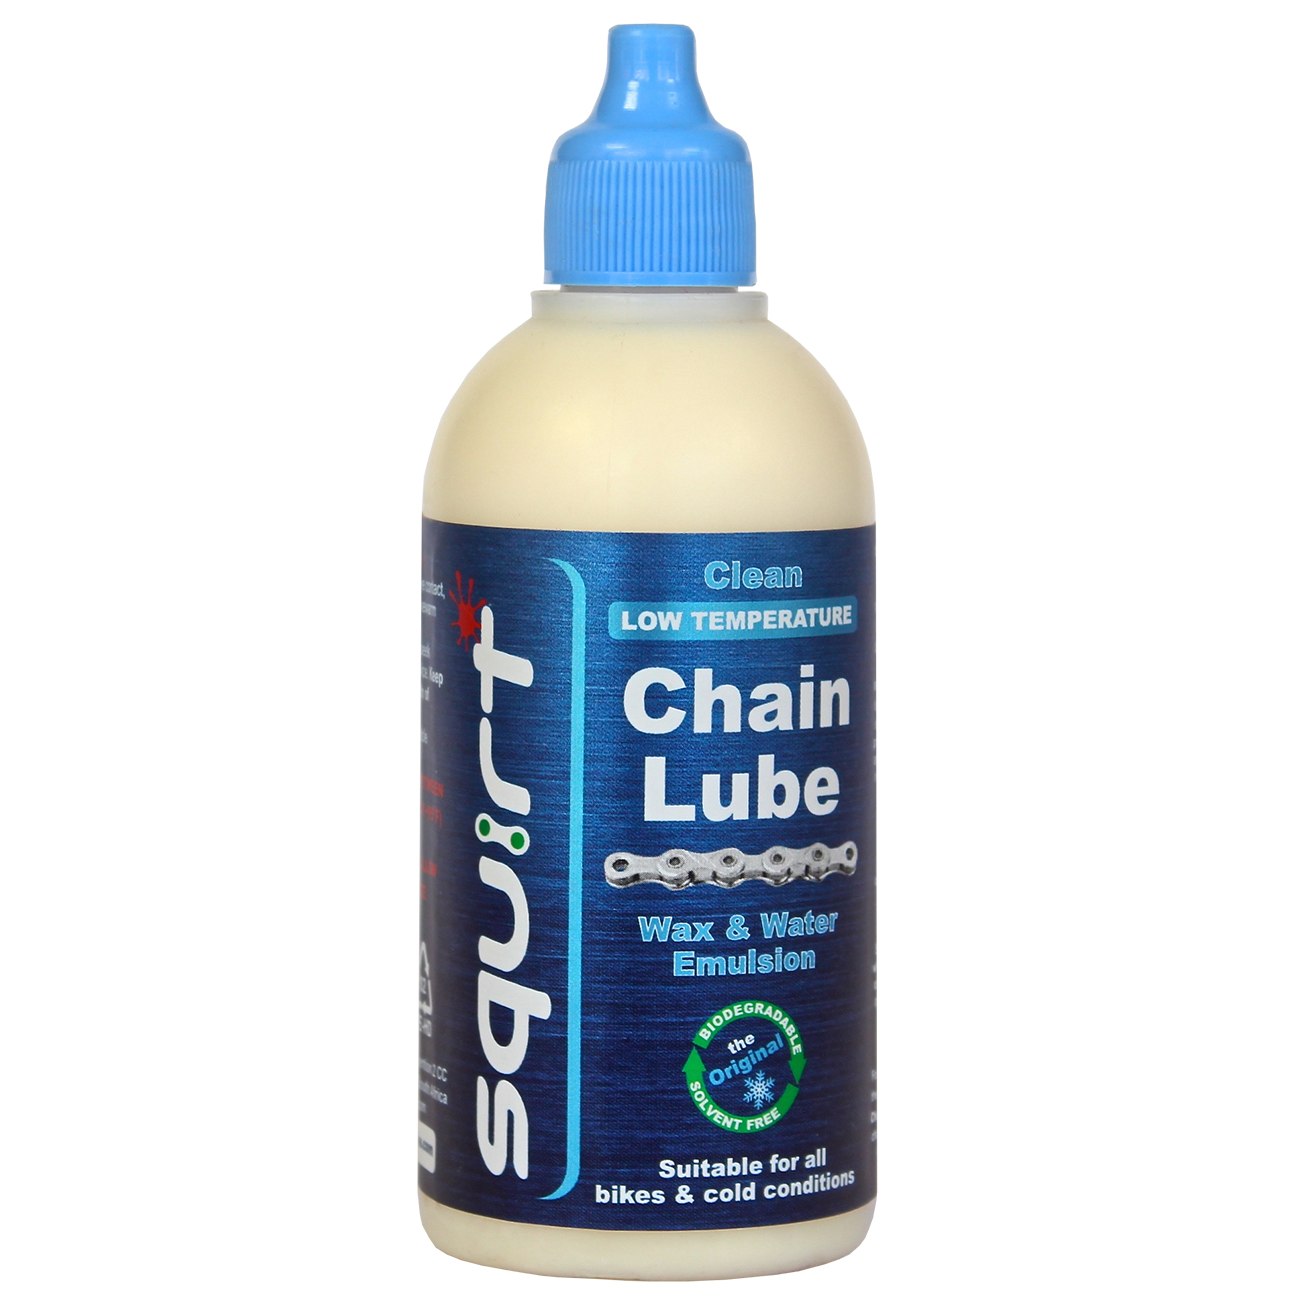 Productfoto van Squirt Lube Low Temperature Chain Lube - 120ml